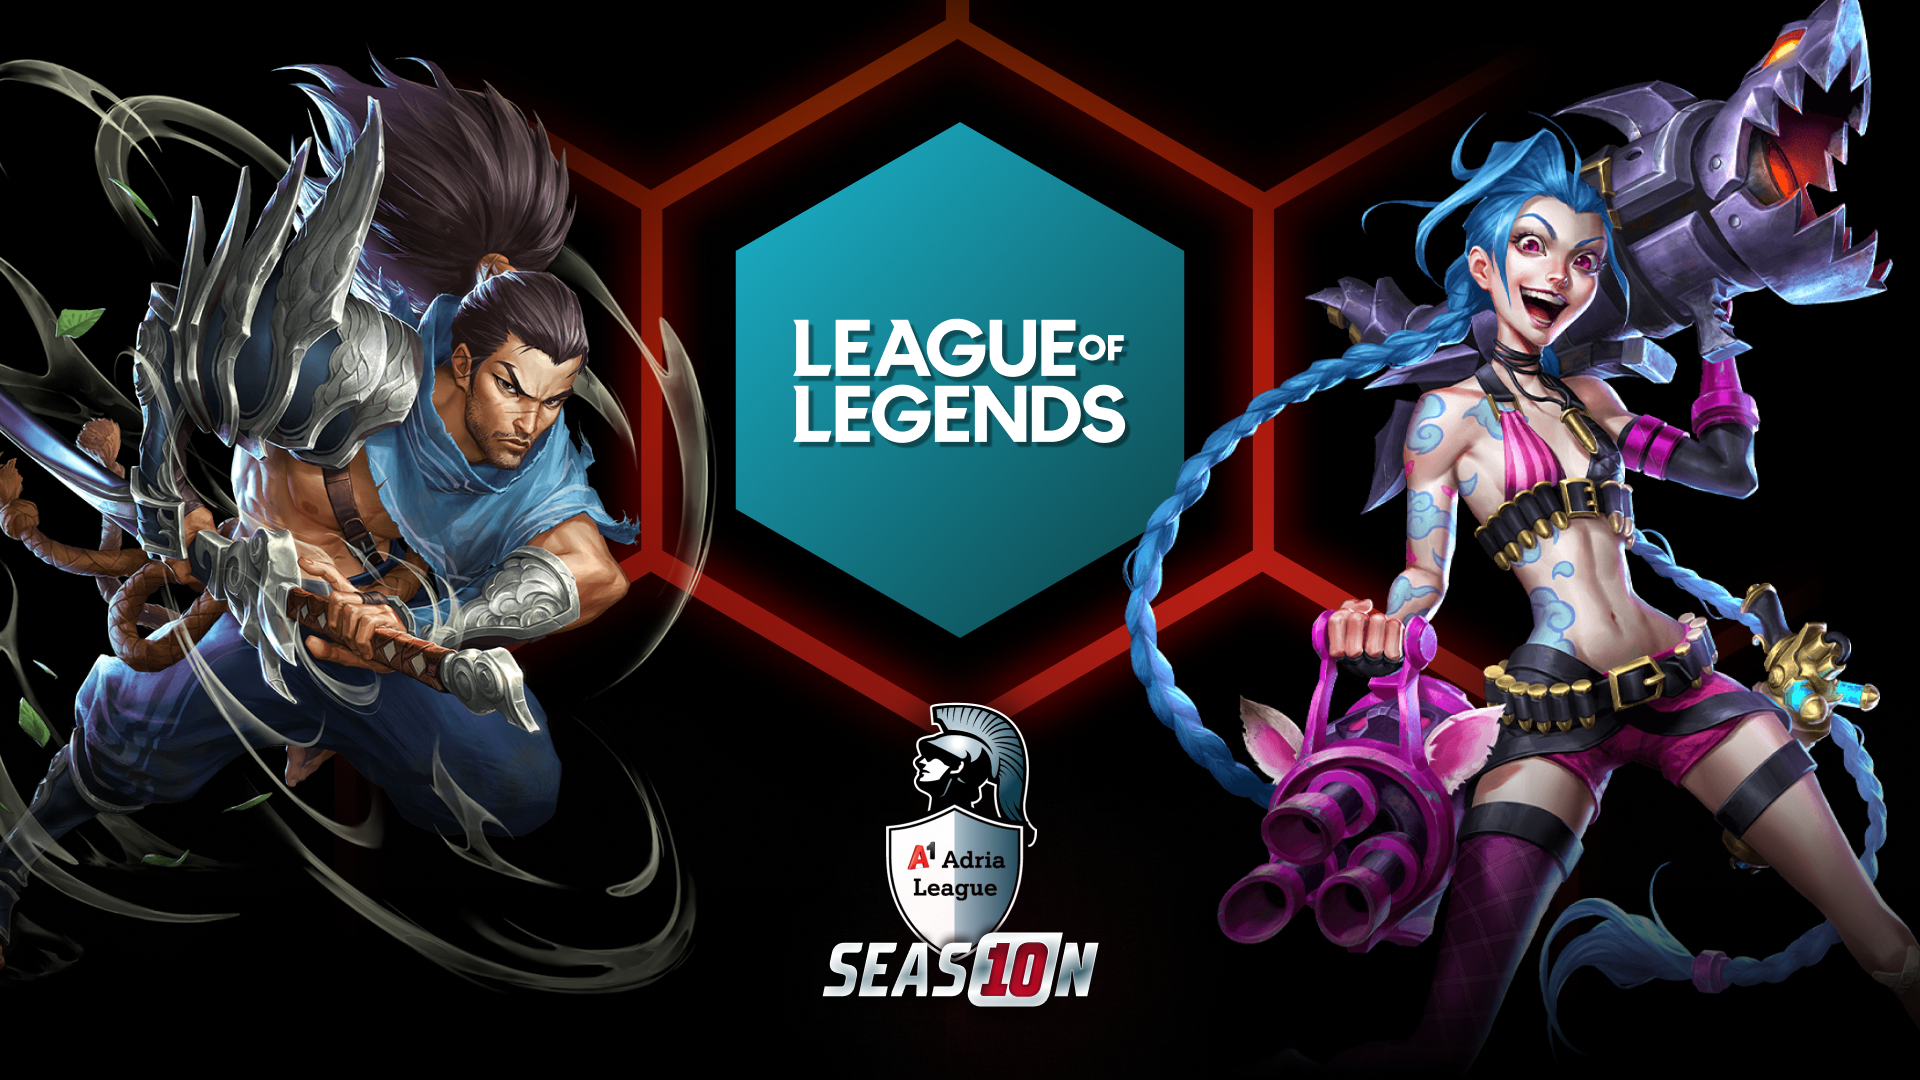 Harmony and 49% winrate join the qualified LoL teams! » A1 Adria